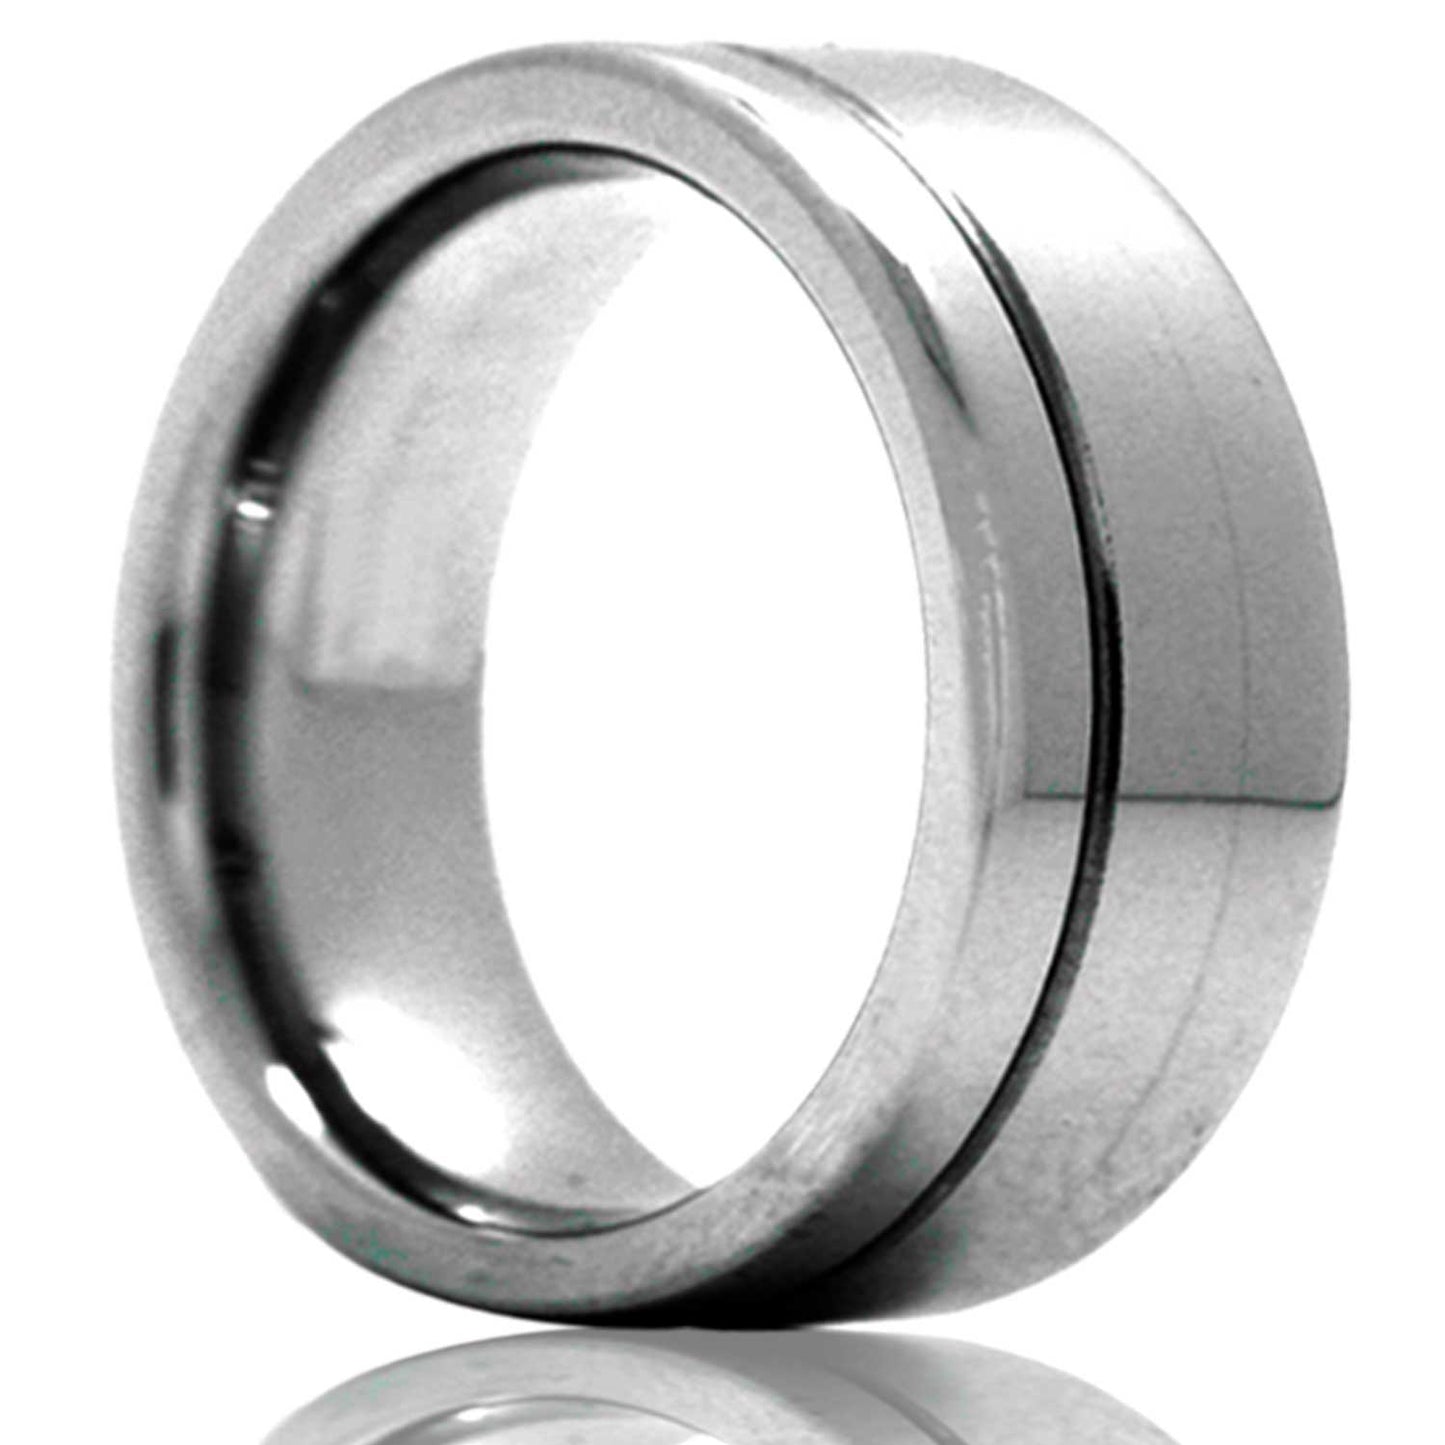 A asymmetrical grooved cobalt wedding band displayed on a neutral white background.